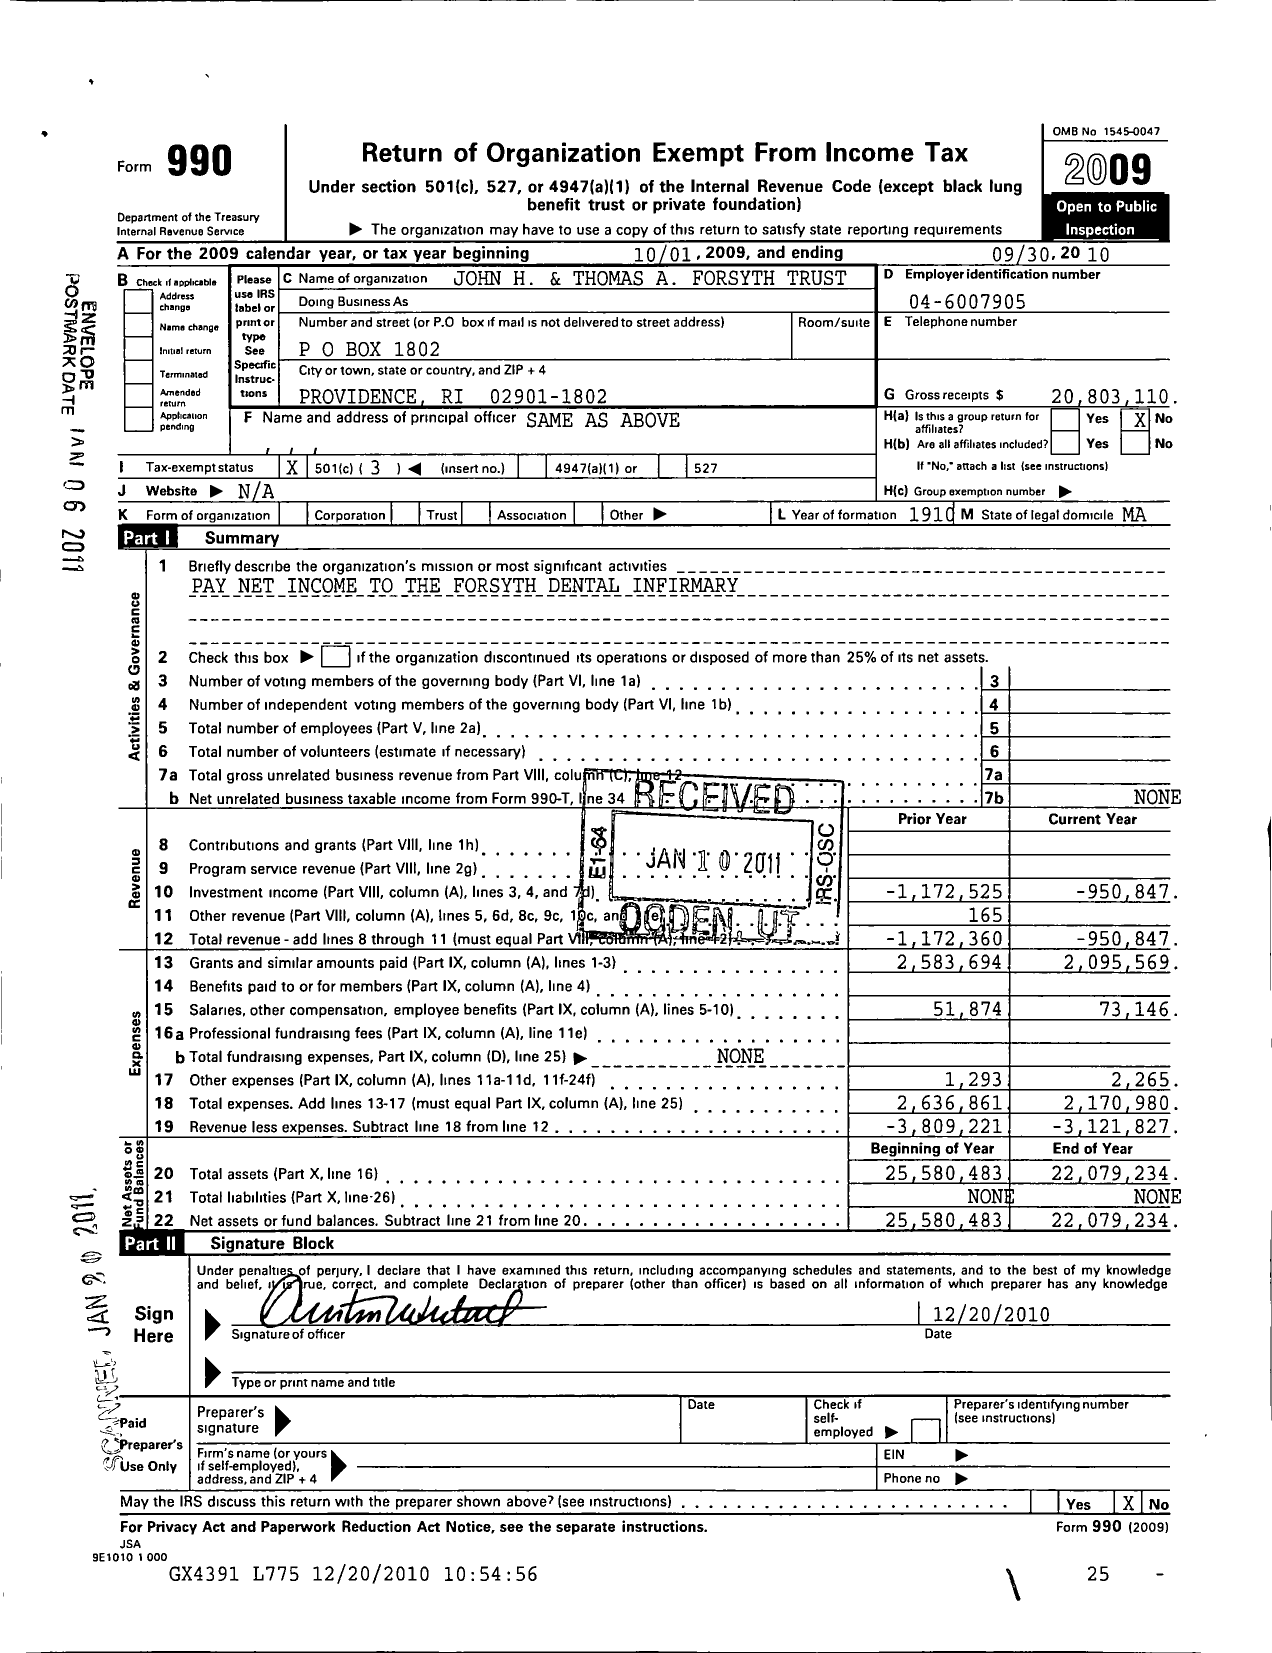 Image of first page of 2009 Form 990 for John H and Thomas A Forsyth Trust